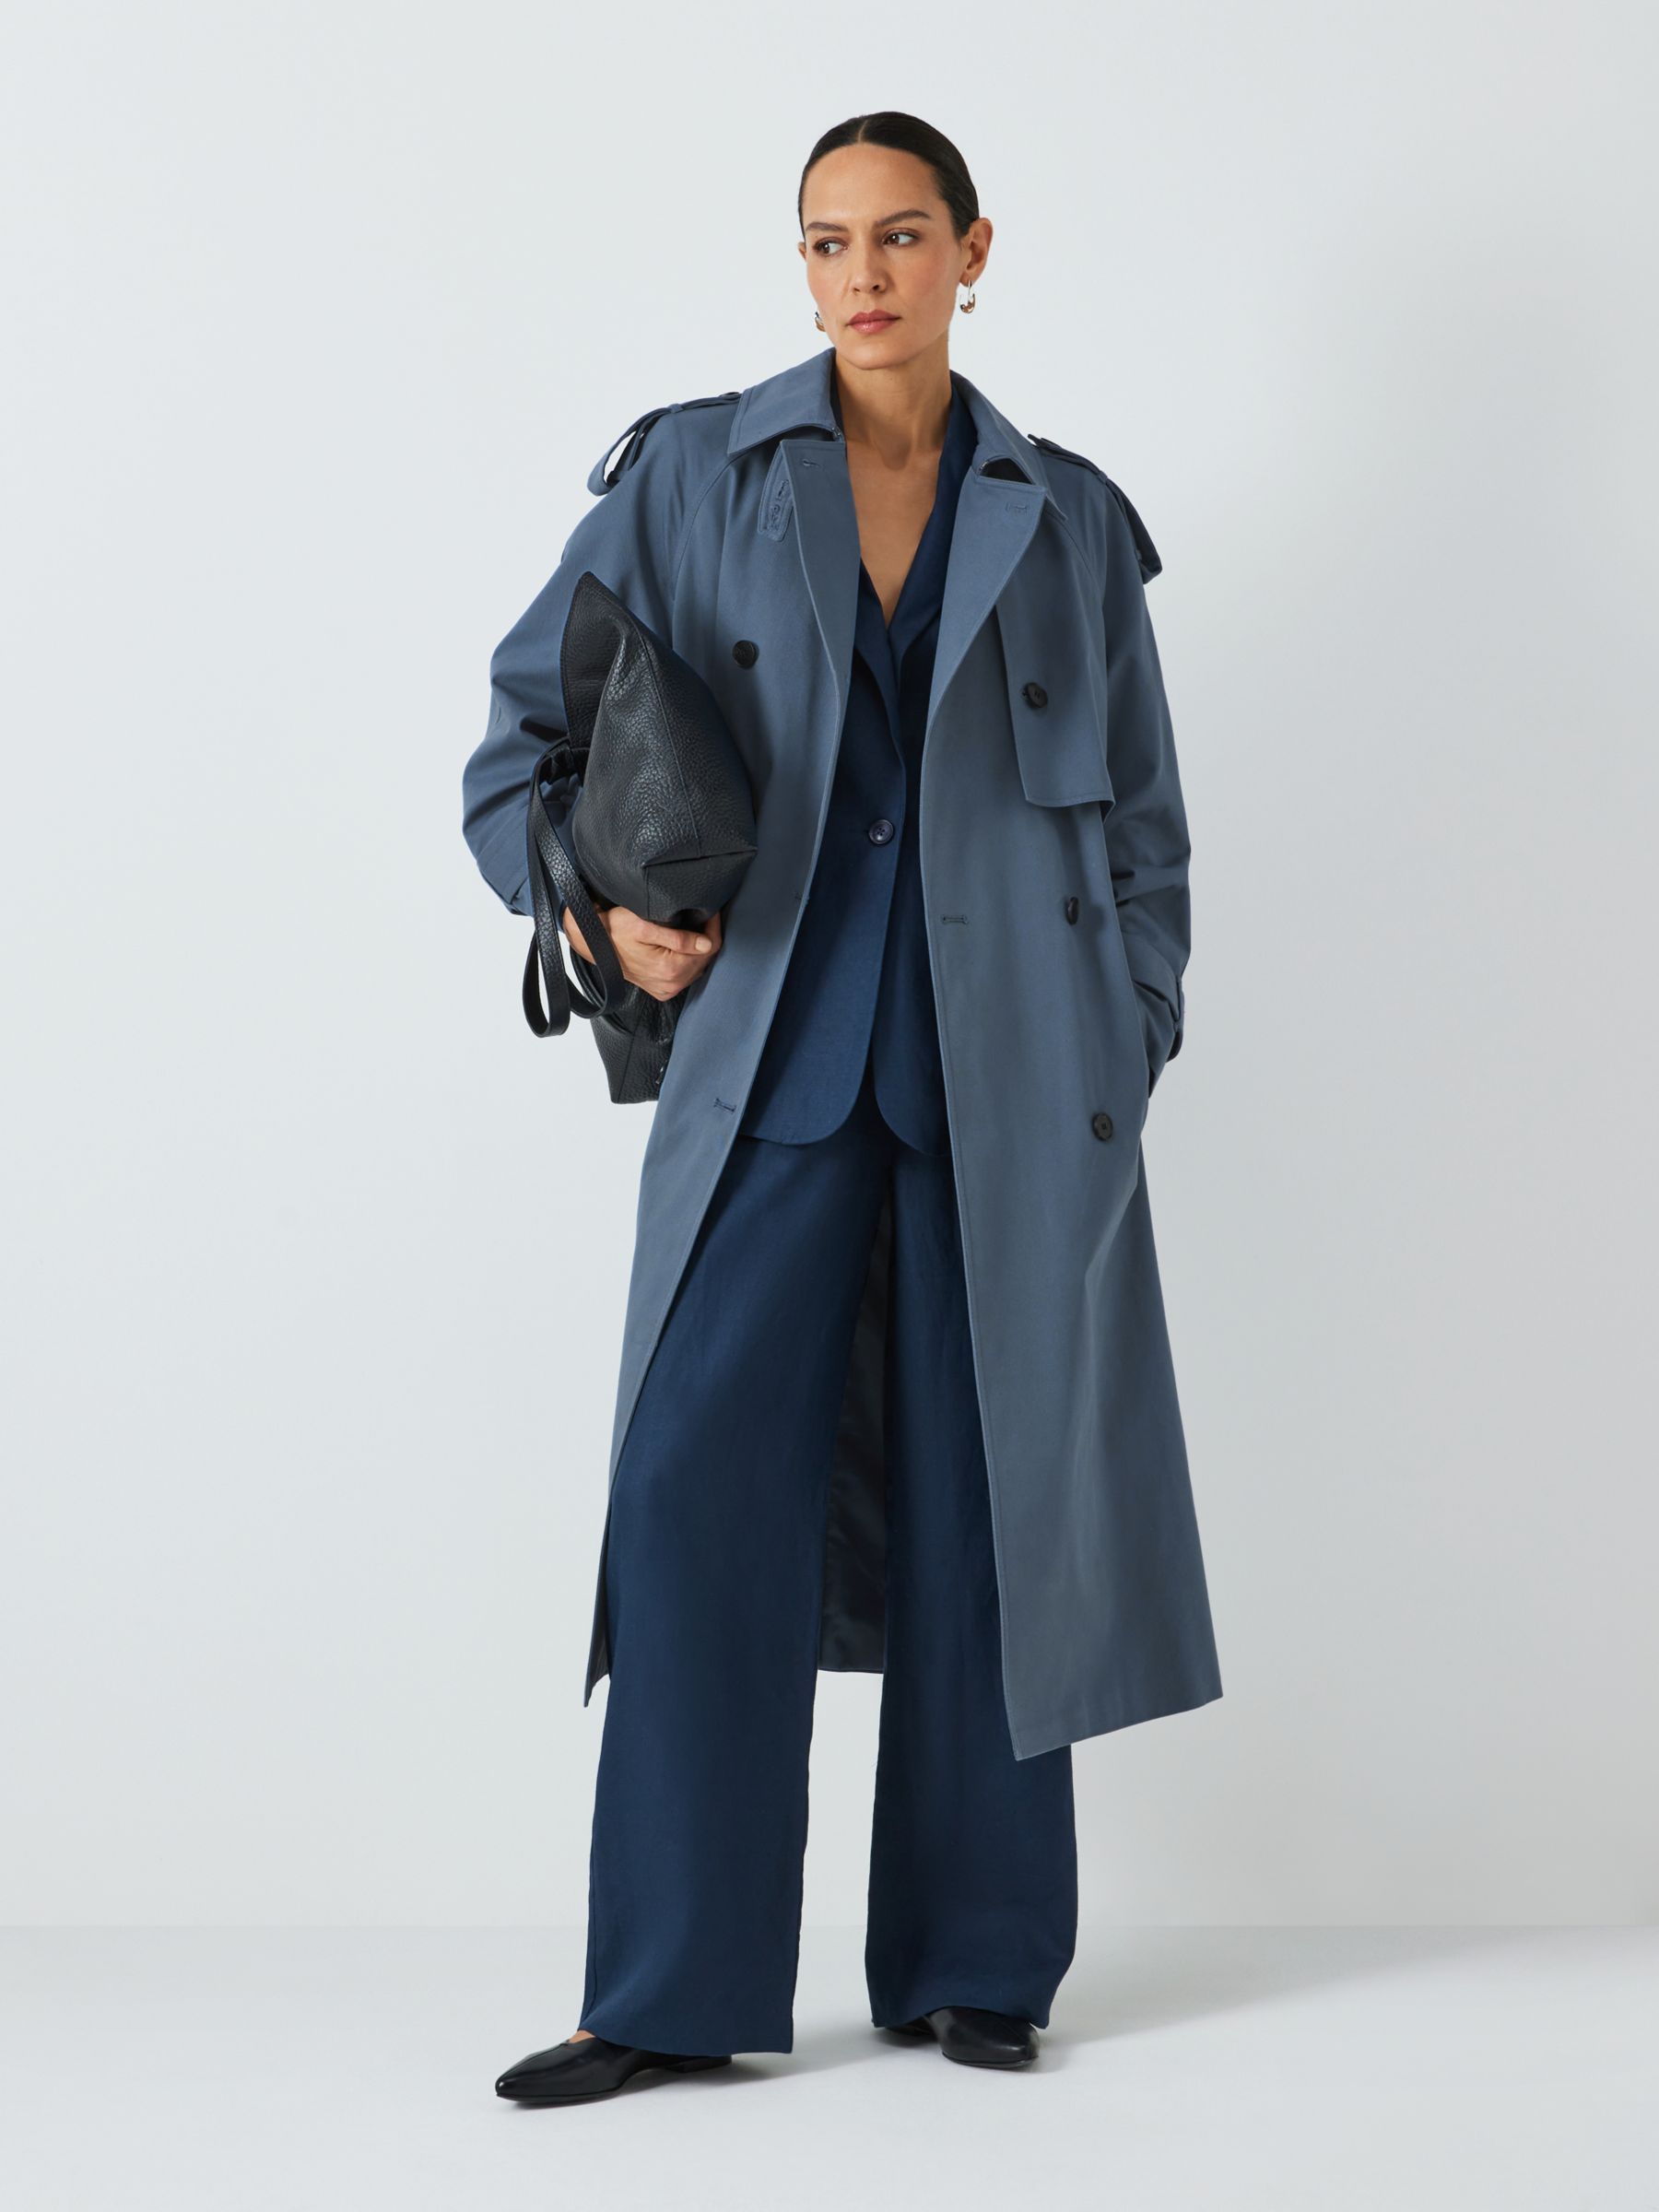 John Lewis Contemporary Trench Coat